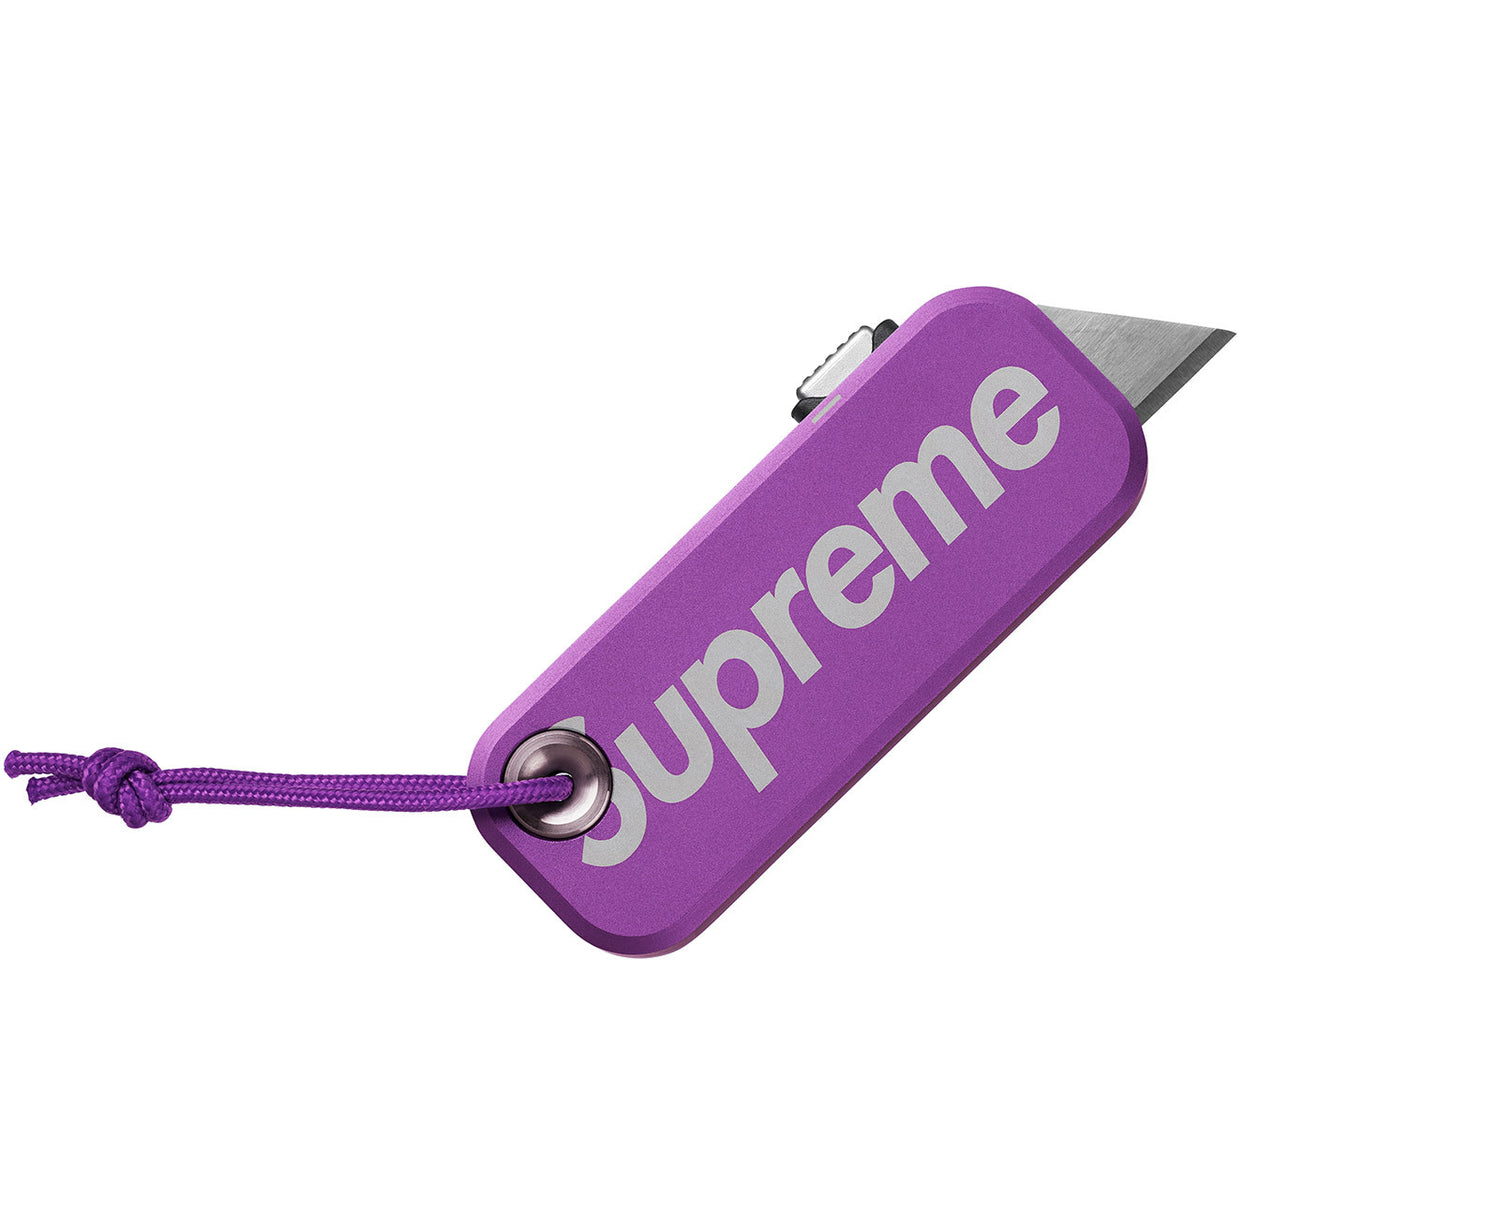 The Palmer Supreme knife with purple case.